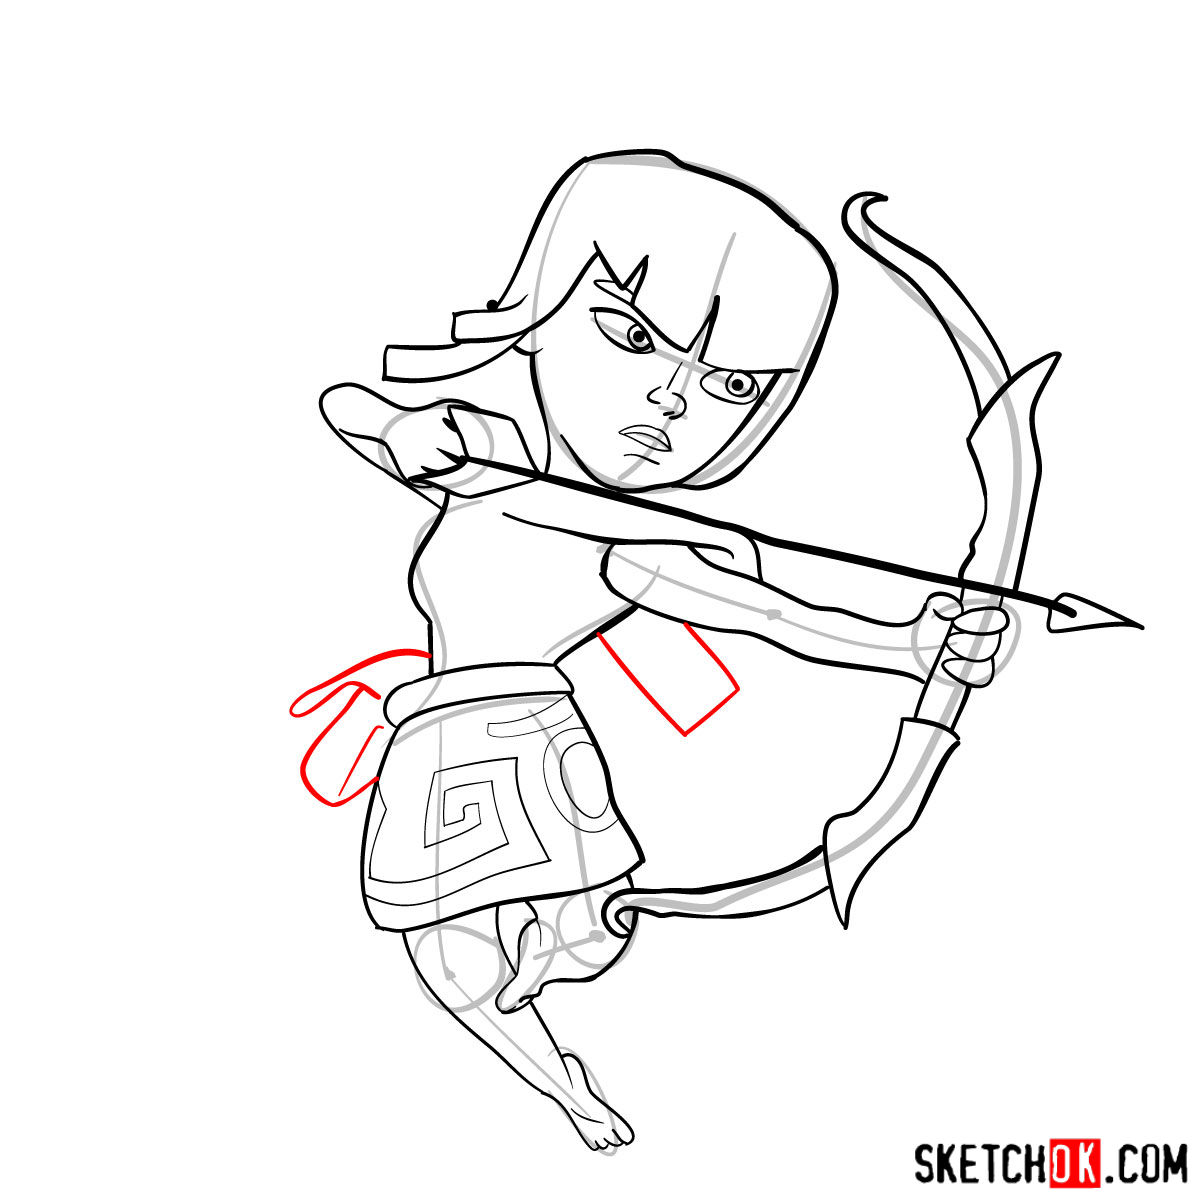 How to draw Archer from Clash of Clans - step 10